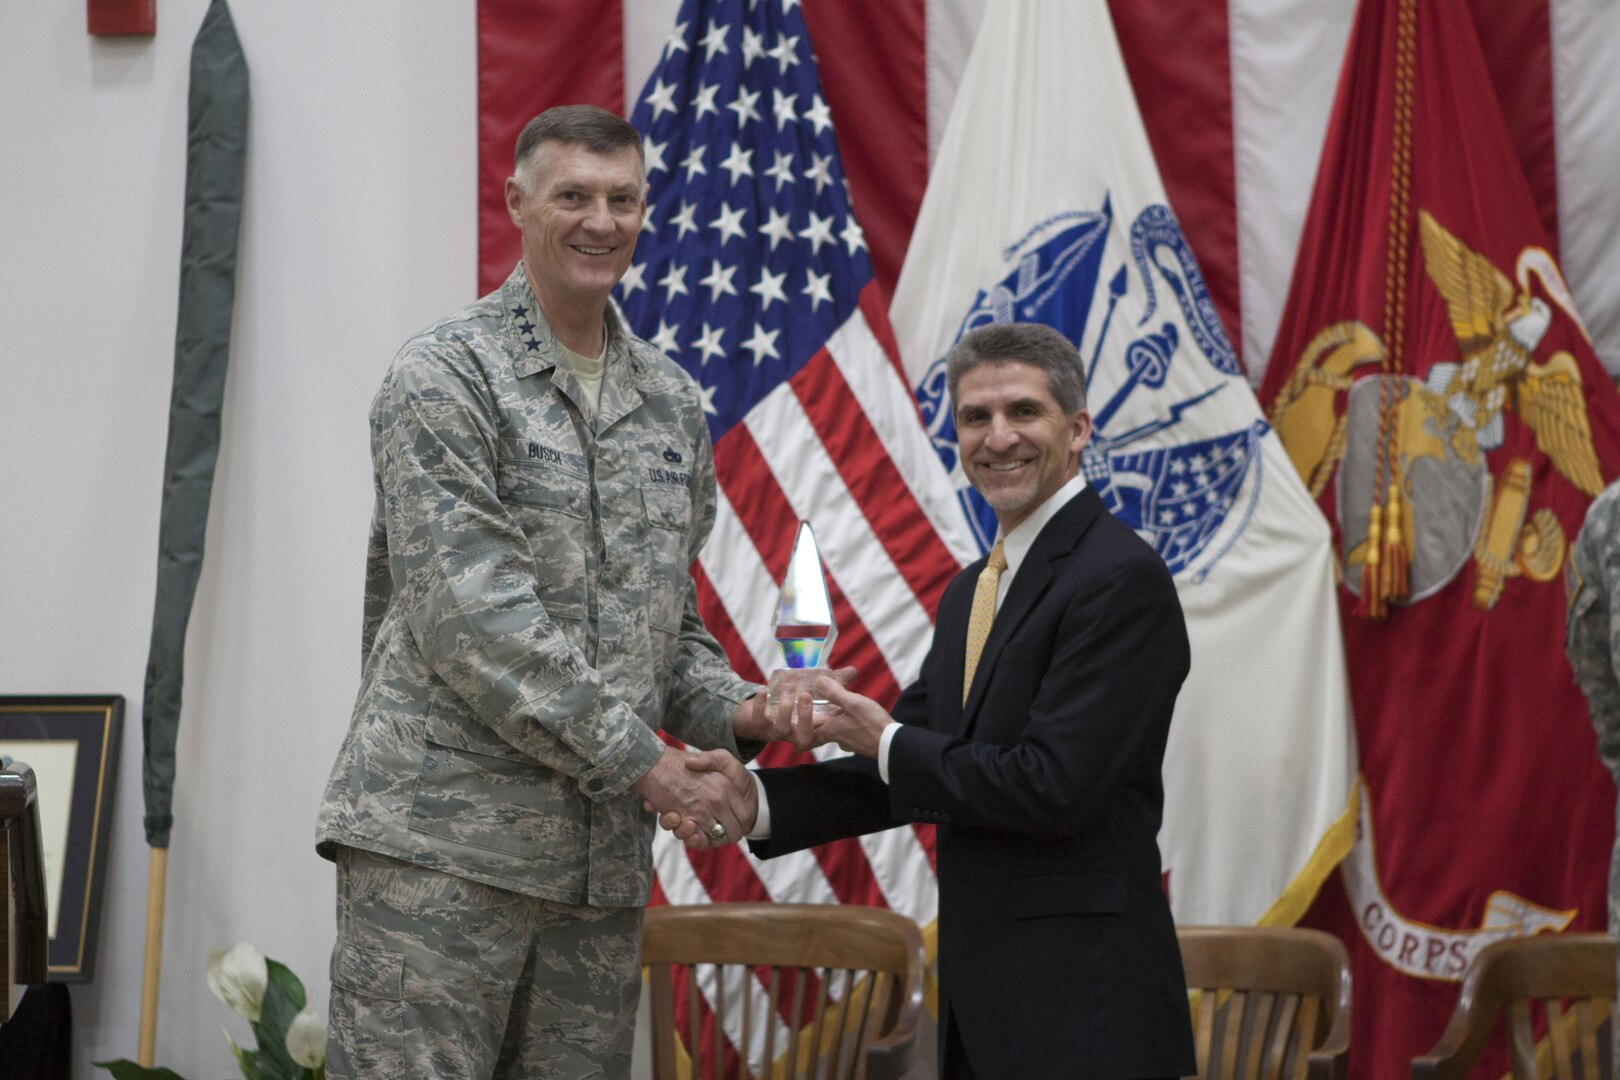 DLA director Air Force Lt. Gen. Andrew E. Busch presents Robert Montefour, site director of Defense Distribution Center, Susquehanna Installation Support the Commander in Chief’s Annual Award for Installation Excellence.